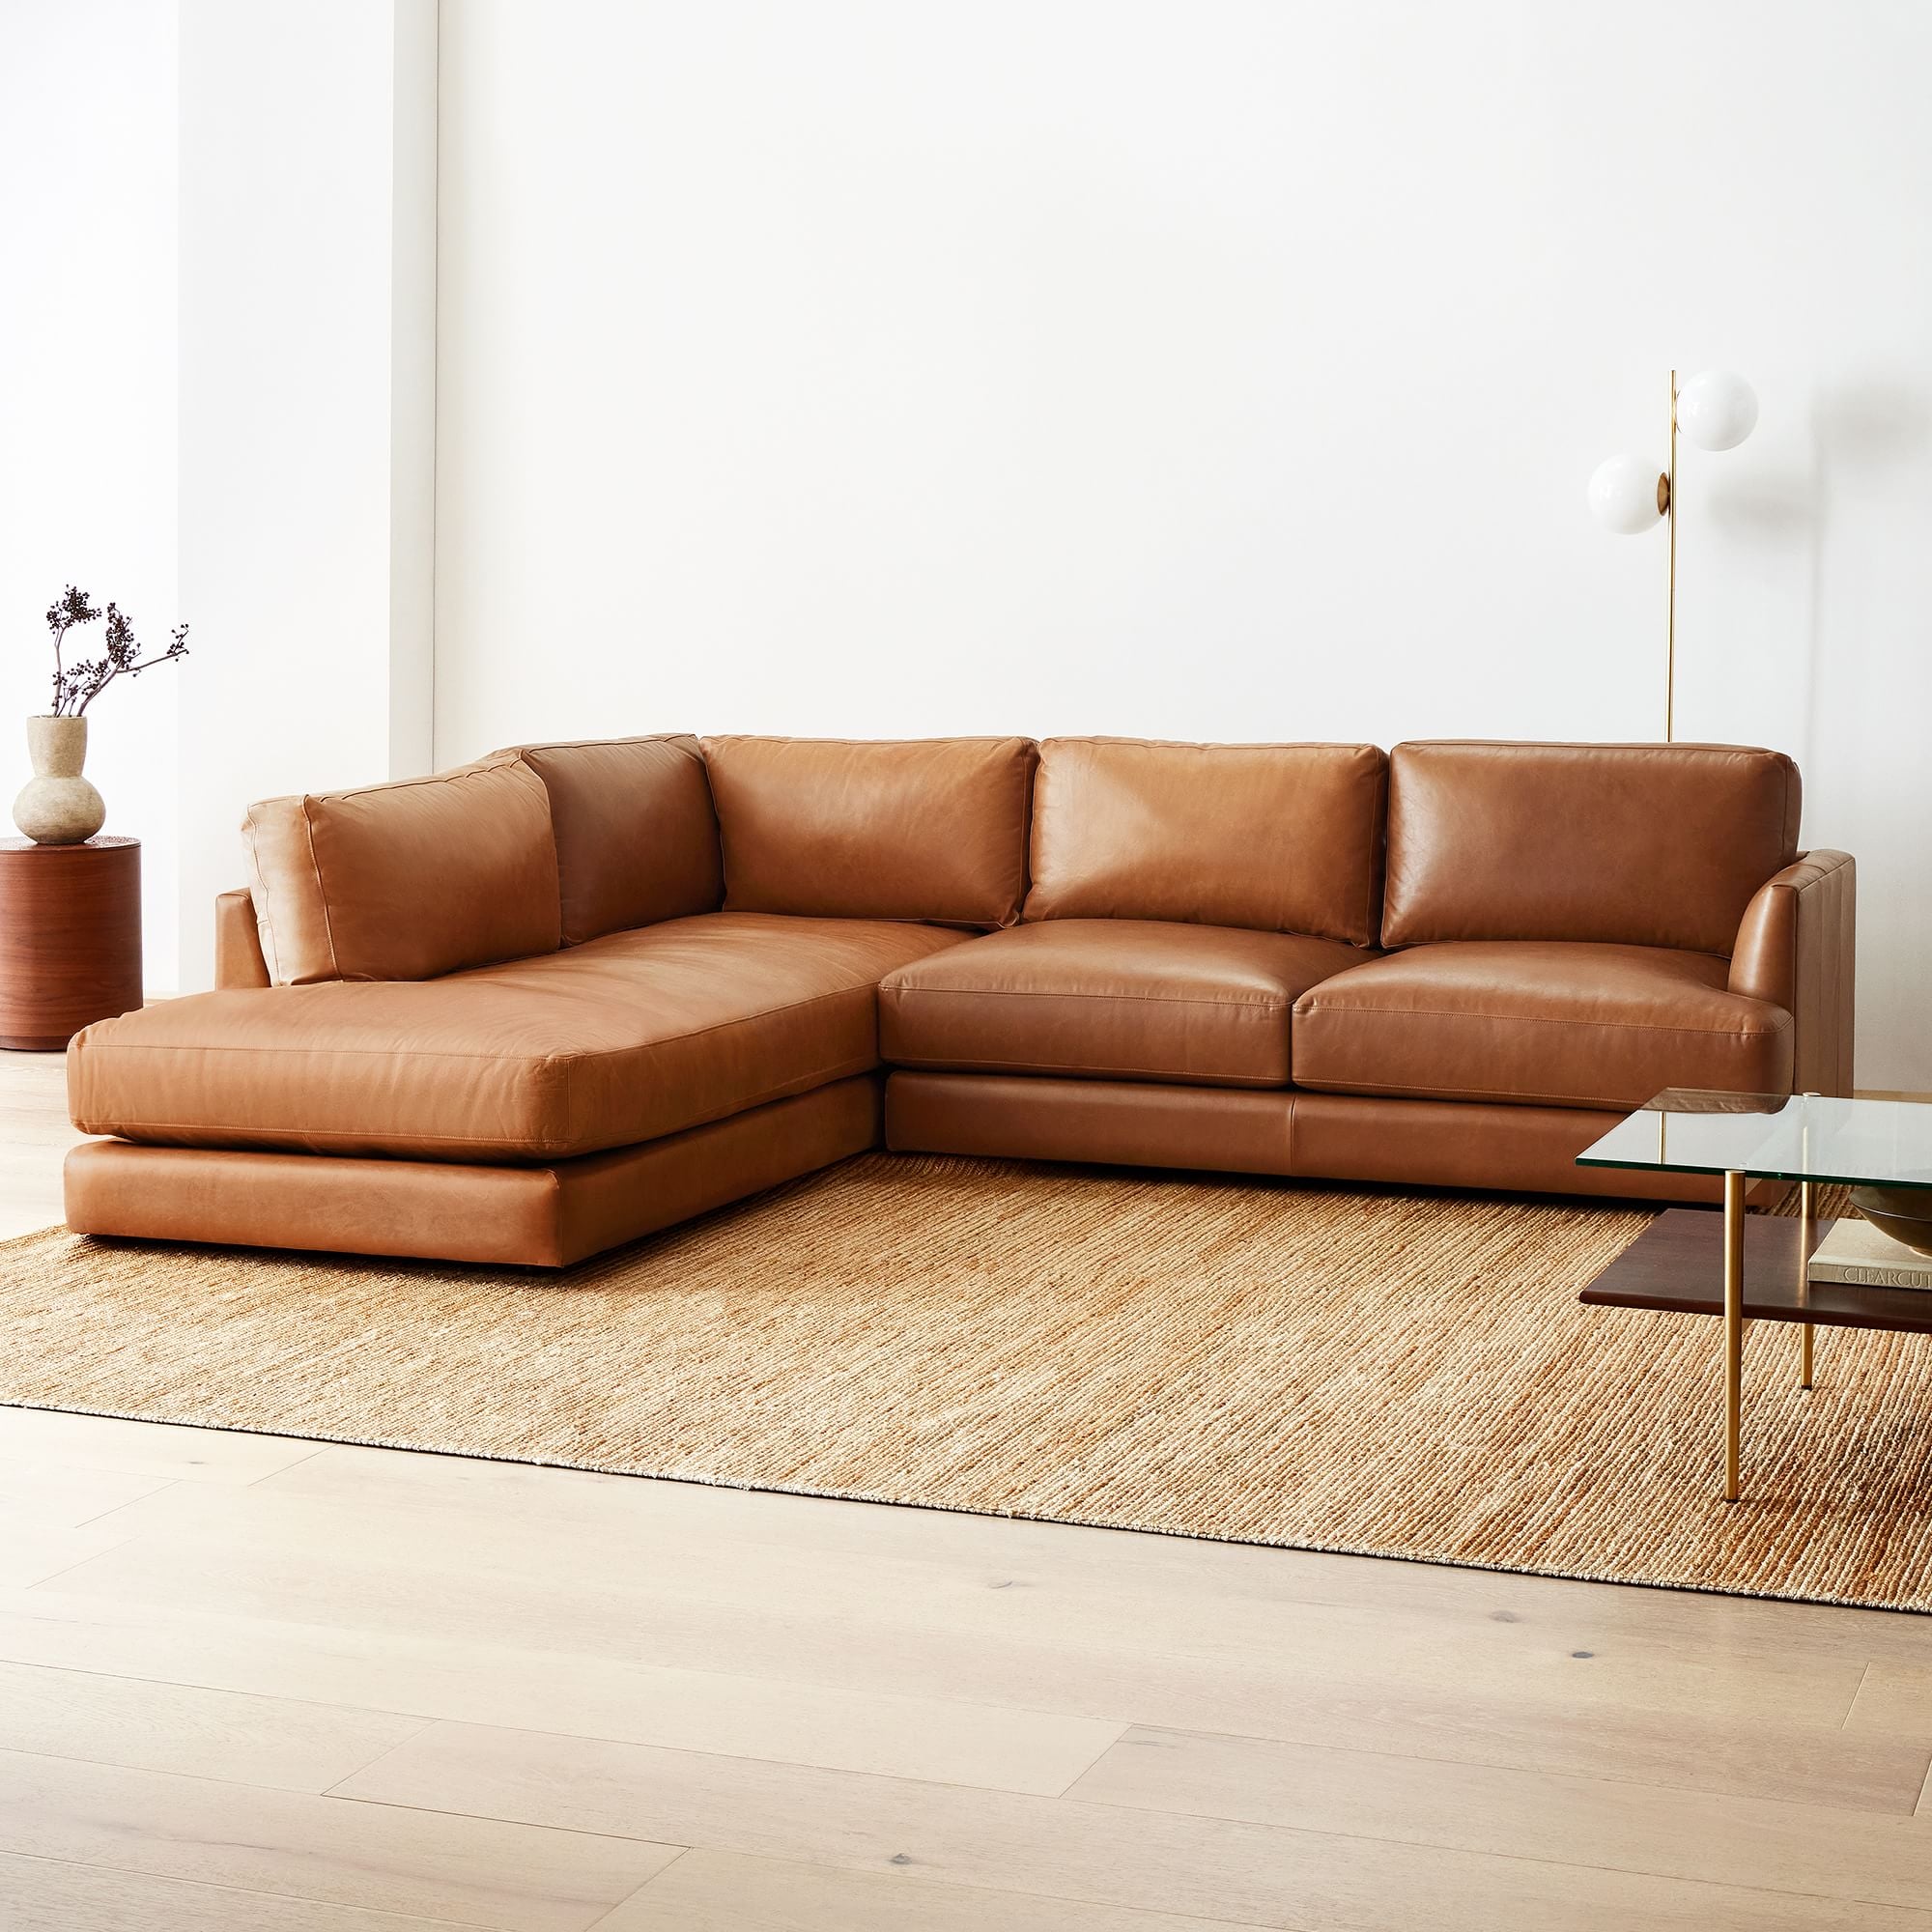 Leather Sofa Elegance: Cleaning and Maintenance for Timeless Beauty